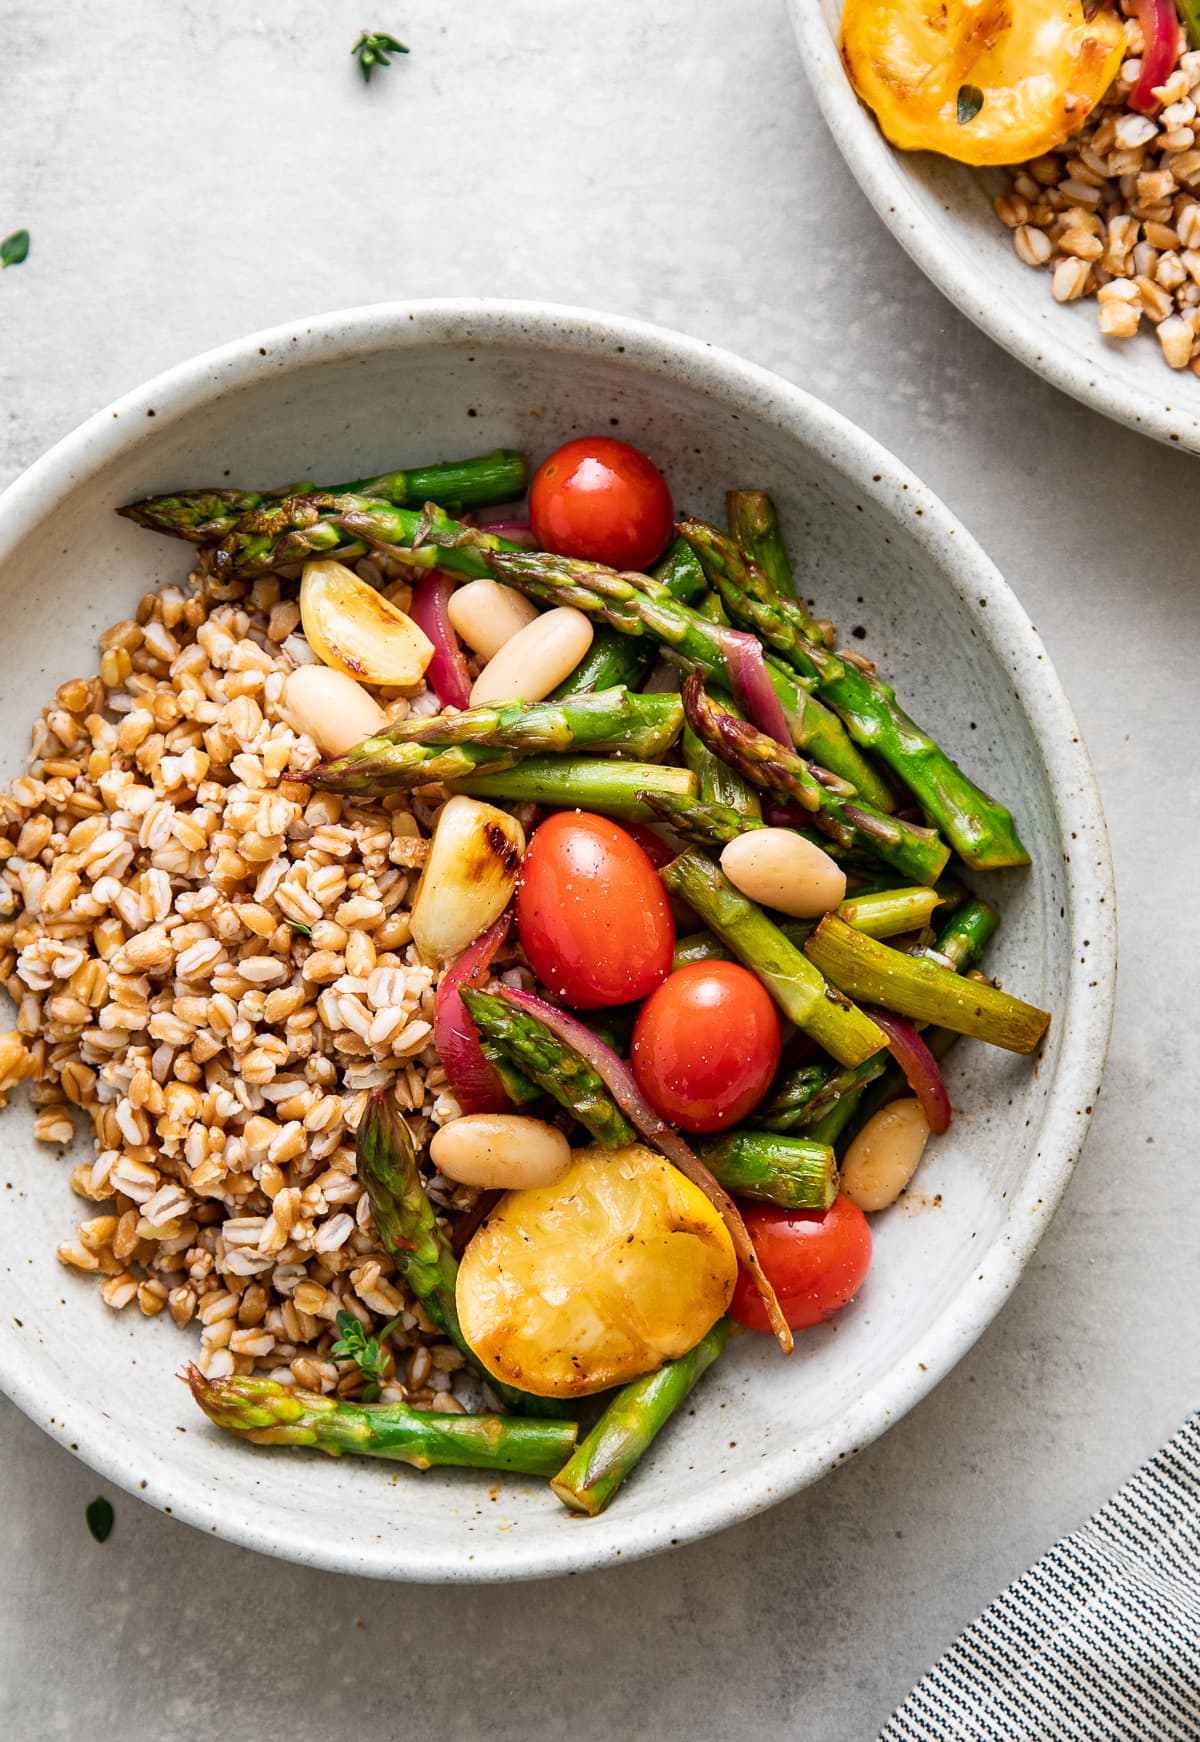 up close, top down view of a bowl with serving of skillet asparagus and tomato medley with farro and items surrounding.